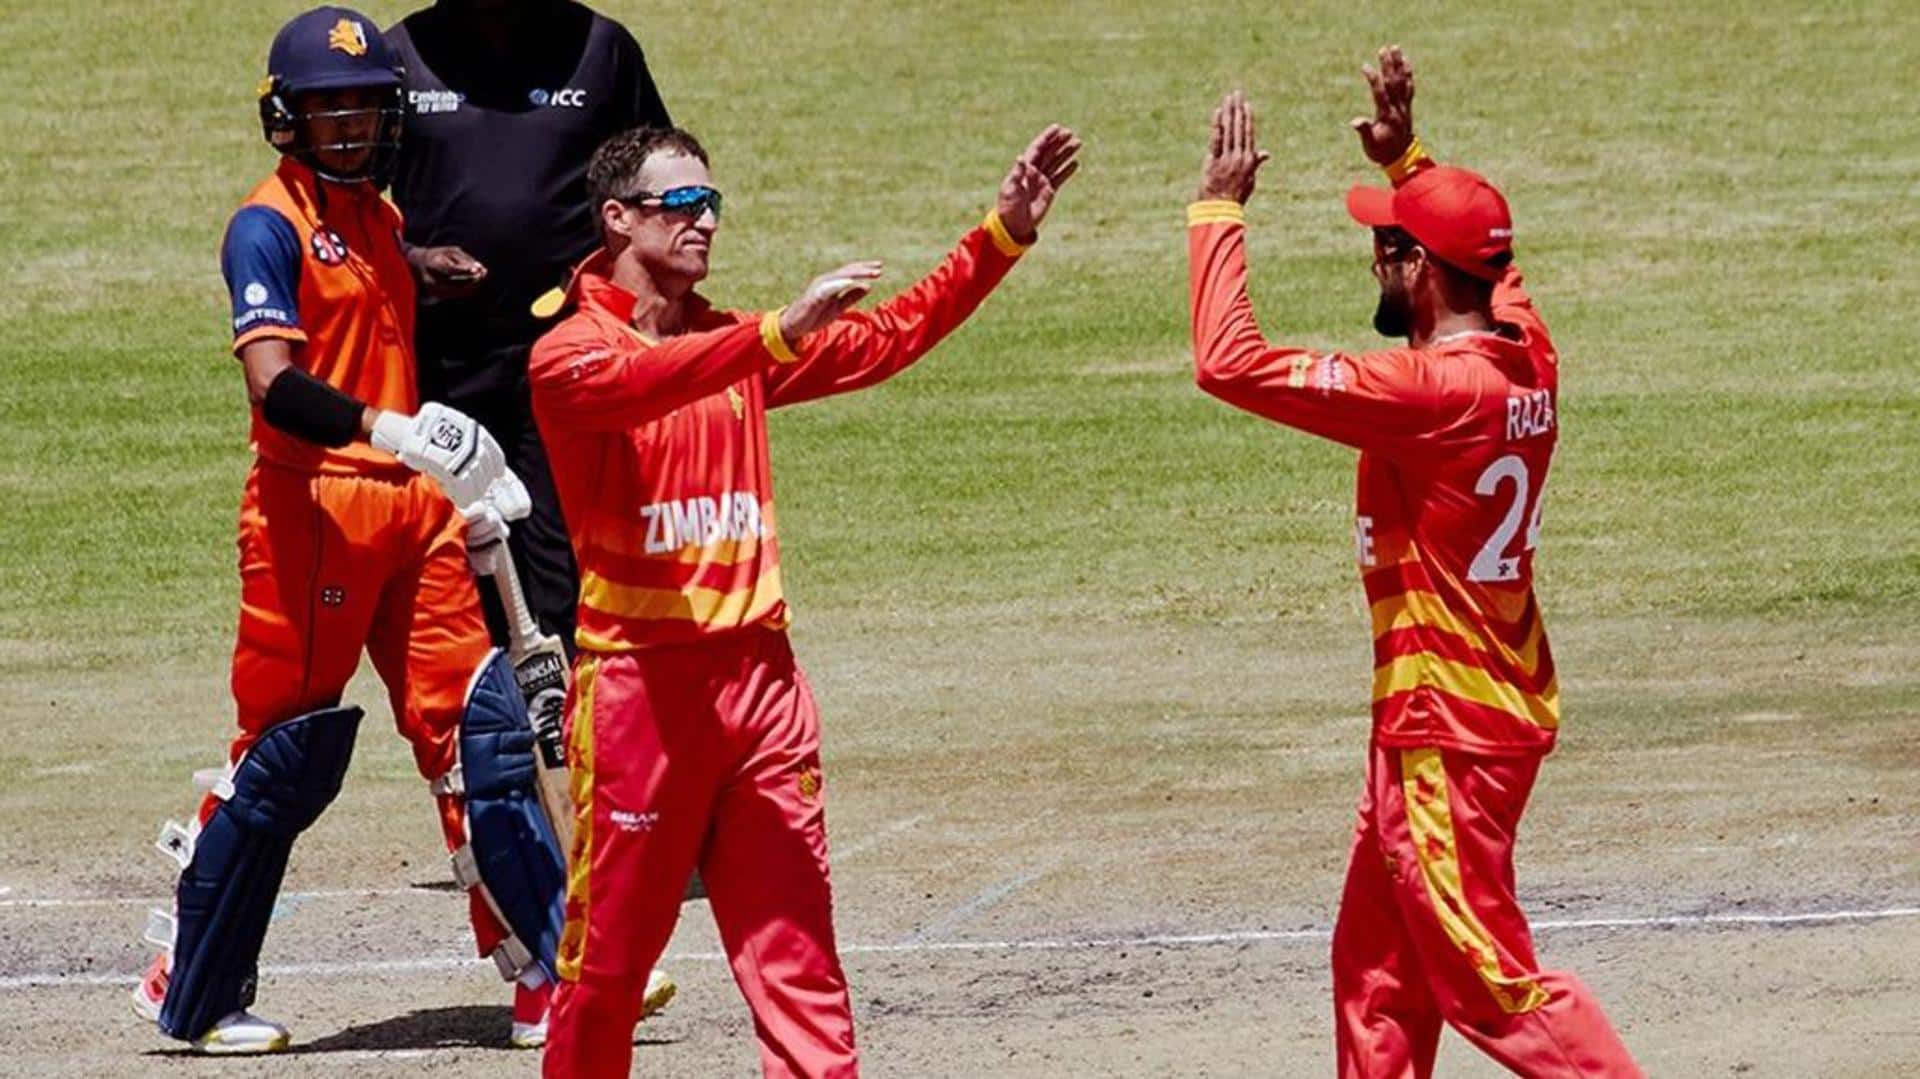 All-rounder Sean Williams' three-fer hands advantage to Zimbabwe against Netherlands